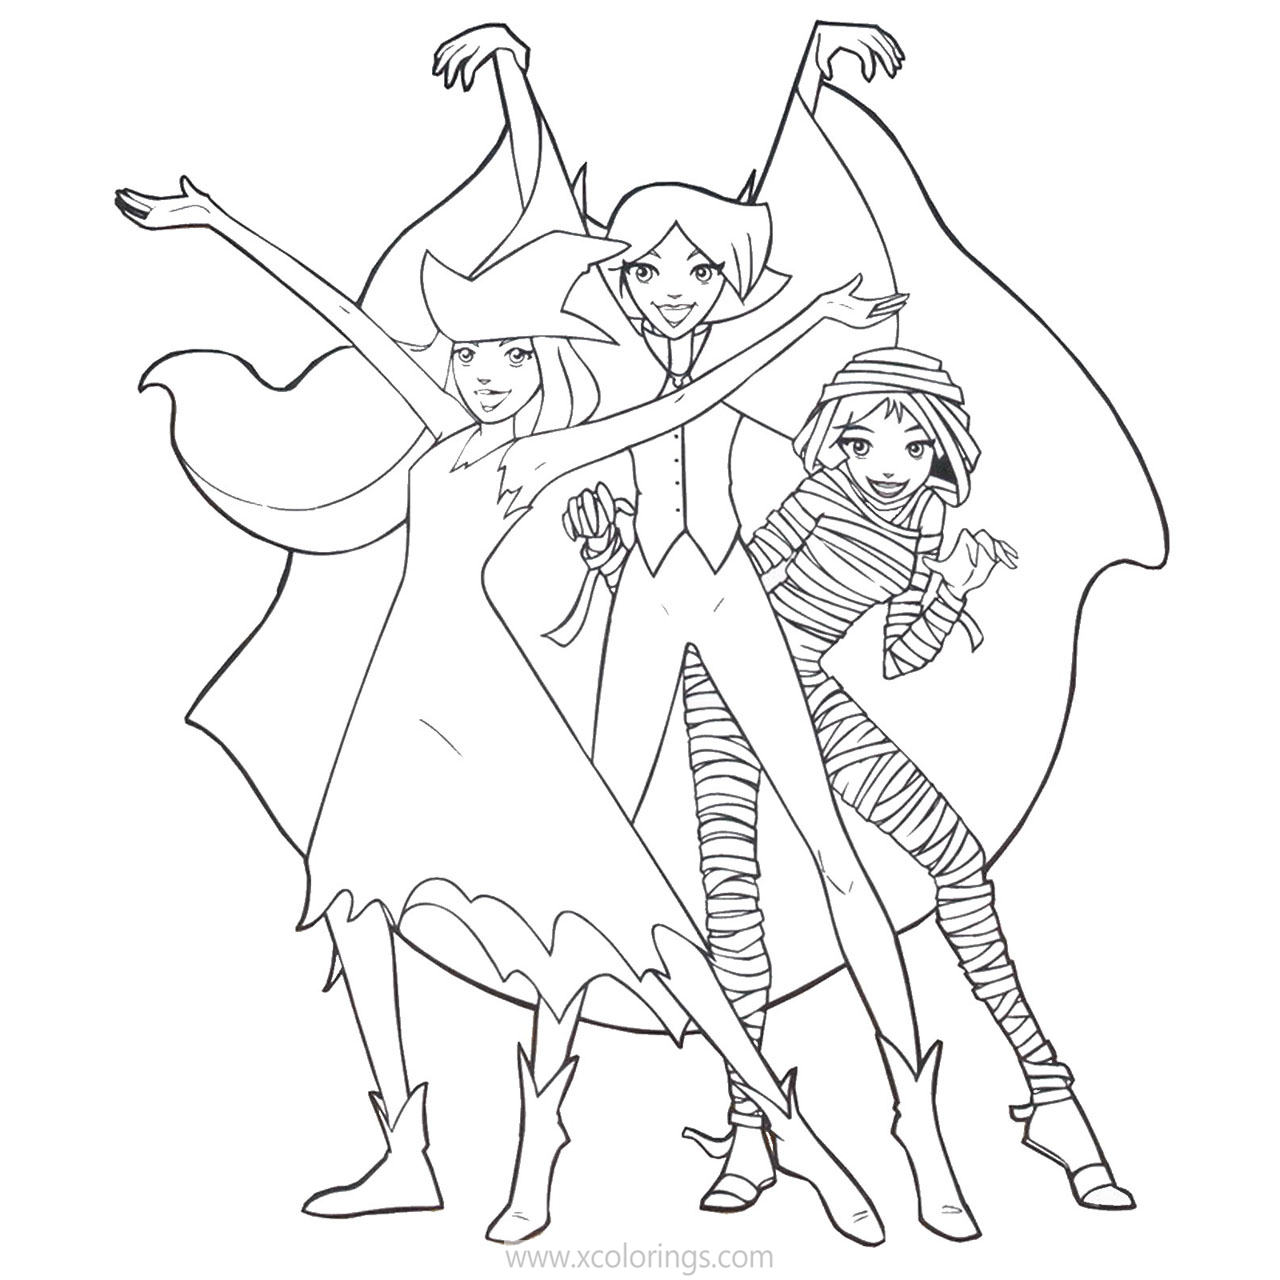 Free Halloween Totally Spies Coloring Pages printable